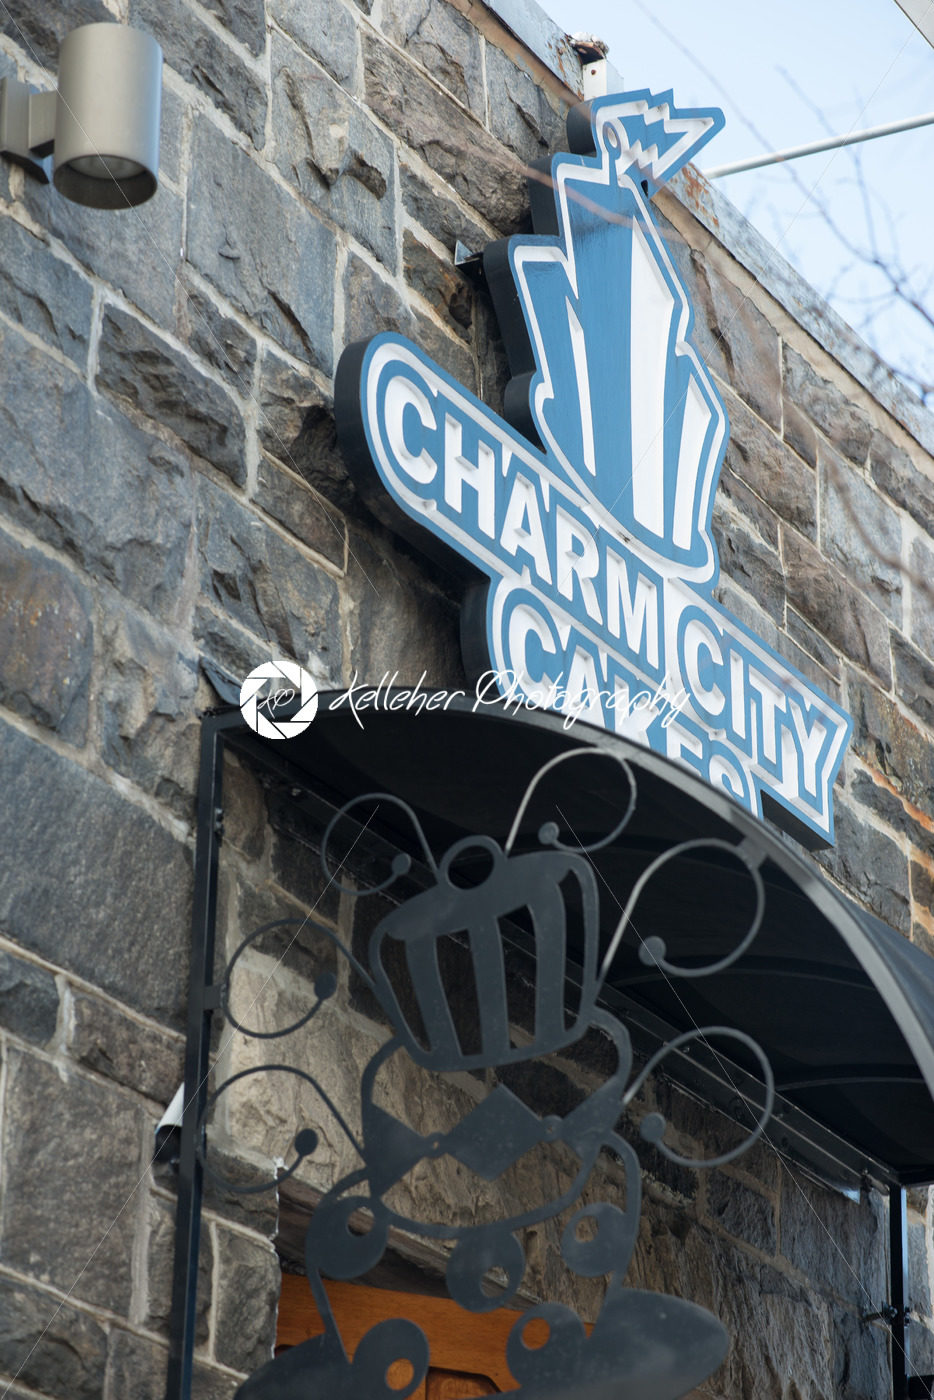 BALTIMORE, MARYLAND – FEBRUARY 18: Sign overhead of Charm City Cakes on February 18, 2017 - Kelleher Photography Store